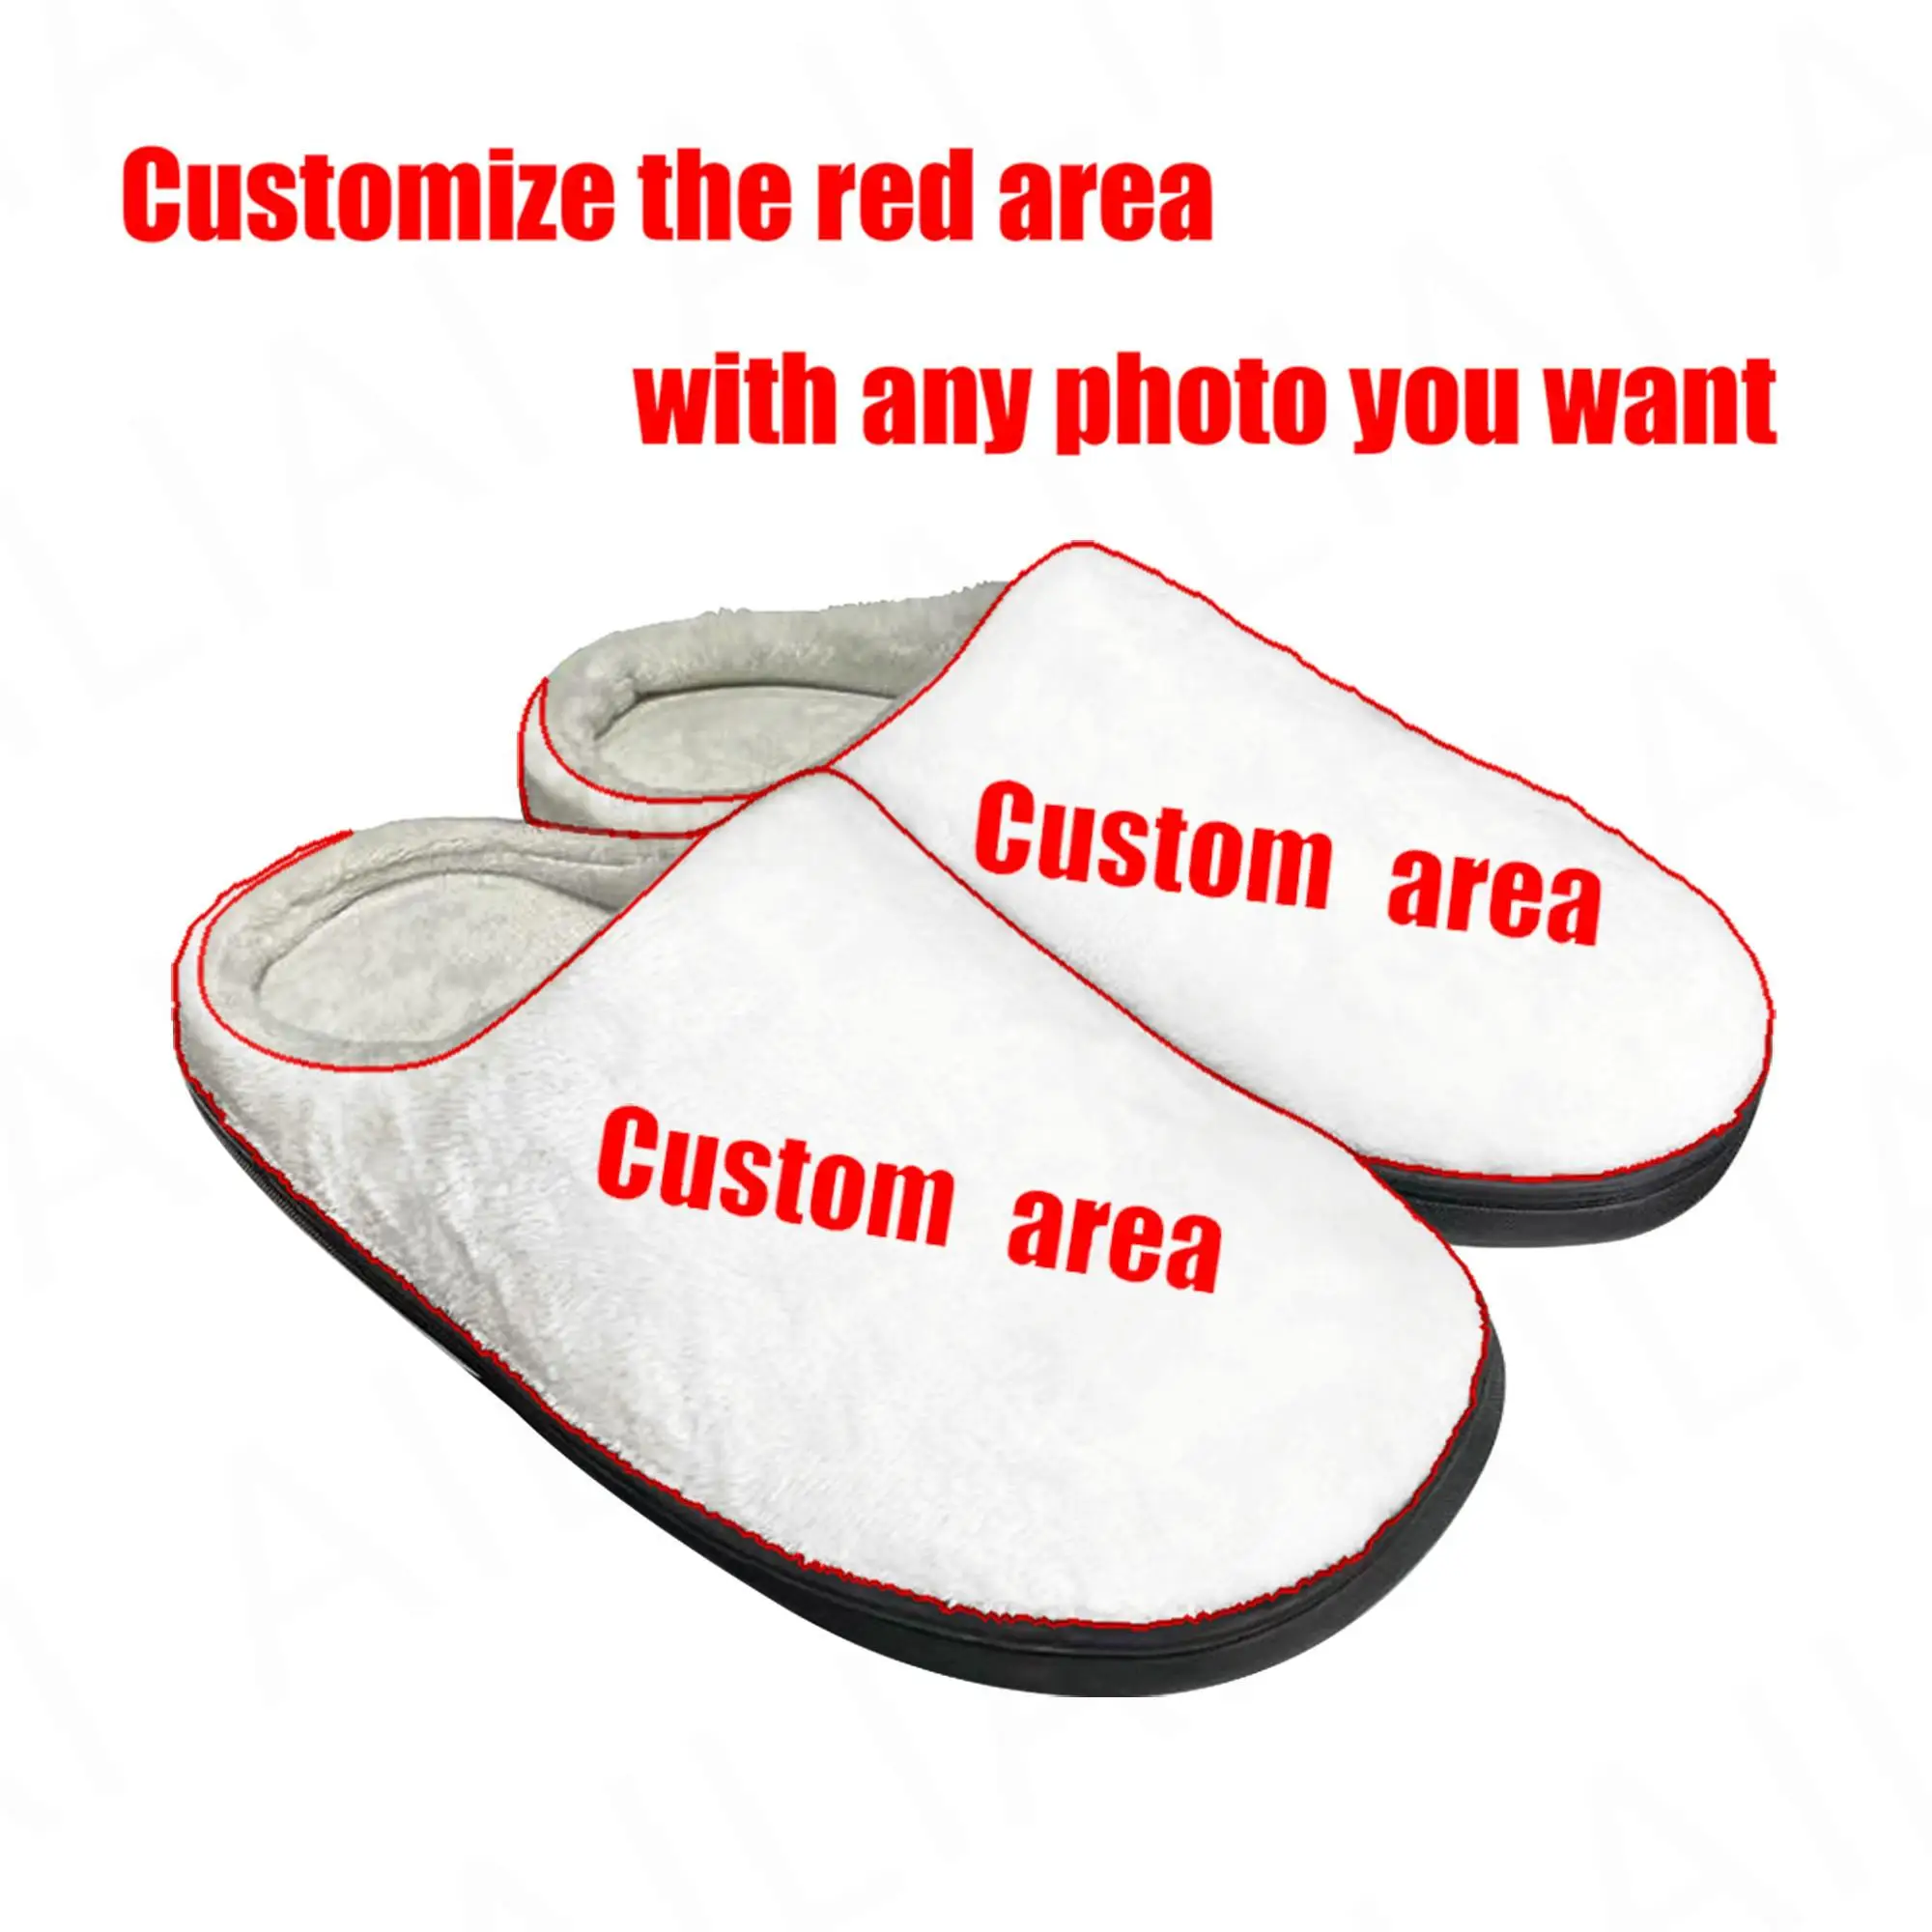 

Tailor-made Home Pop Cotton Slippers Mens Womens Plush Bedroom Casual Keep Warm Shoes Thermal Indoor Slipper Commission DIY Shoe